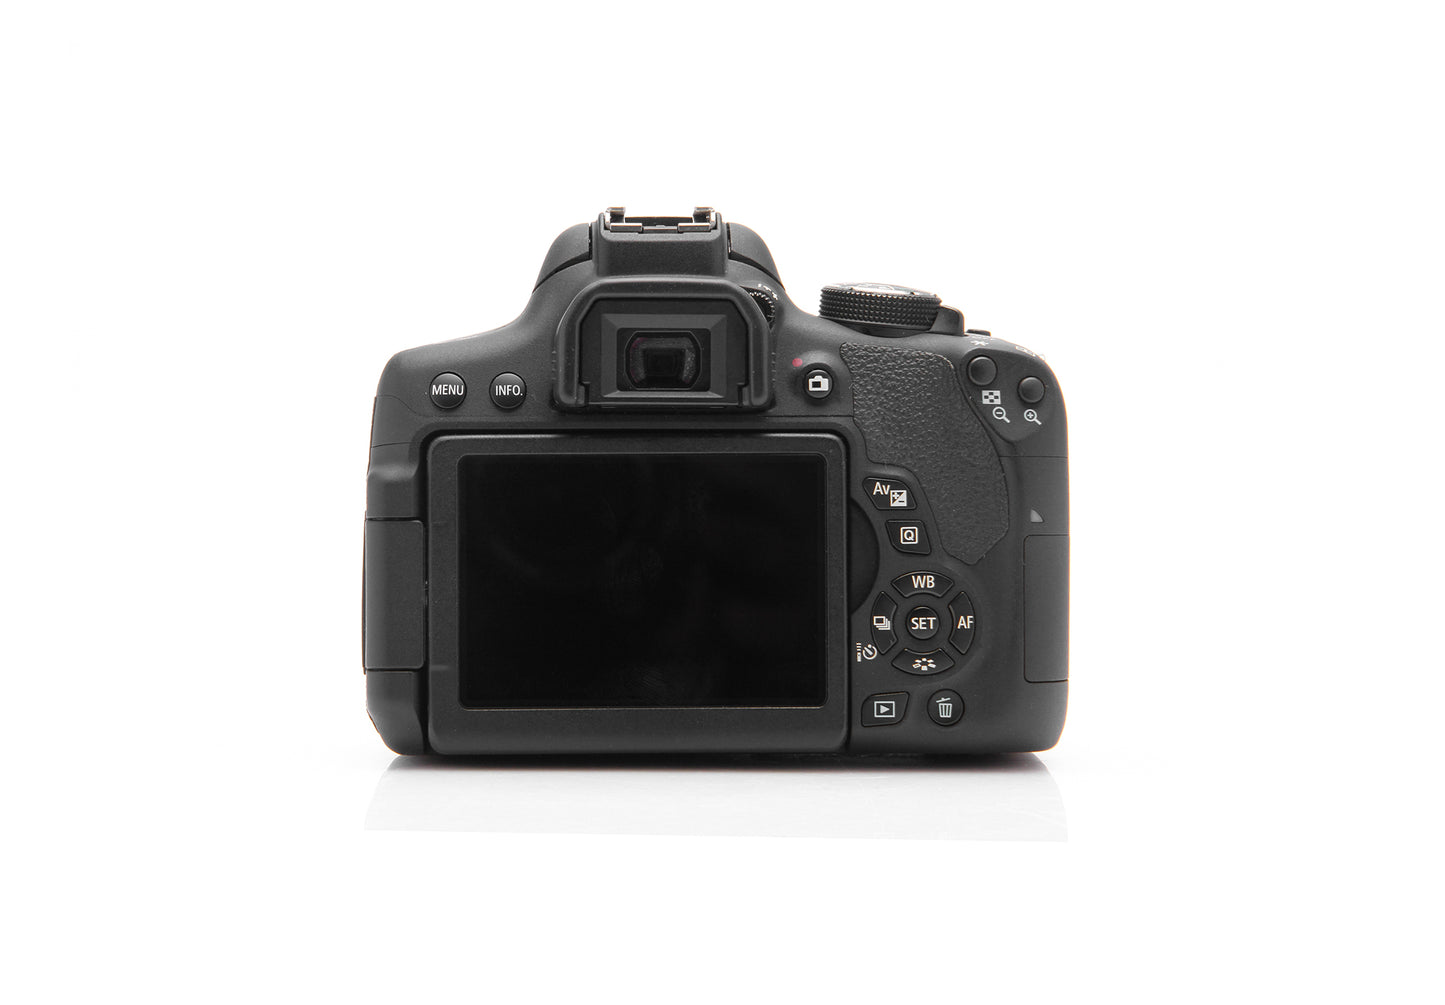 Used Canon 750D 24.2 MP Camera with 18-55mm Lens